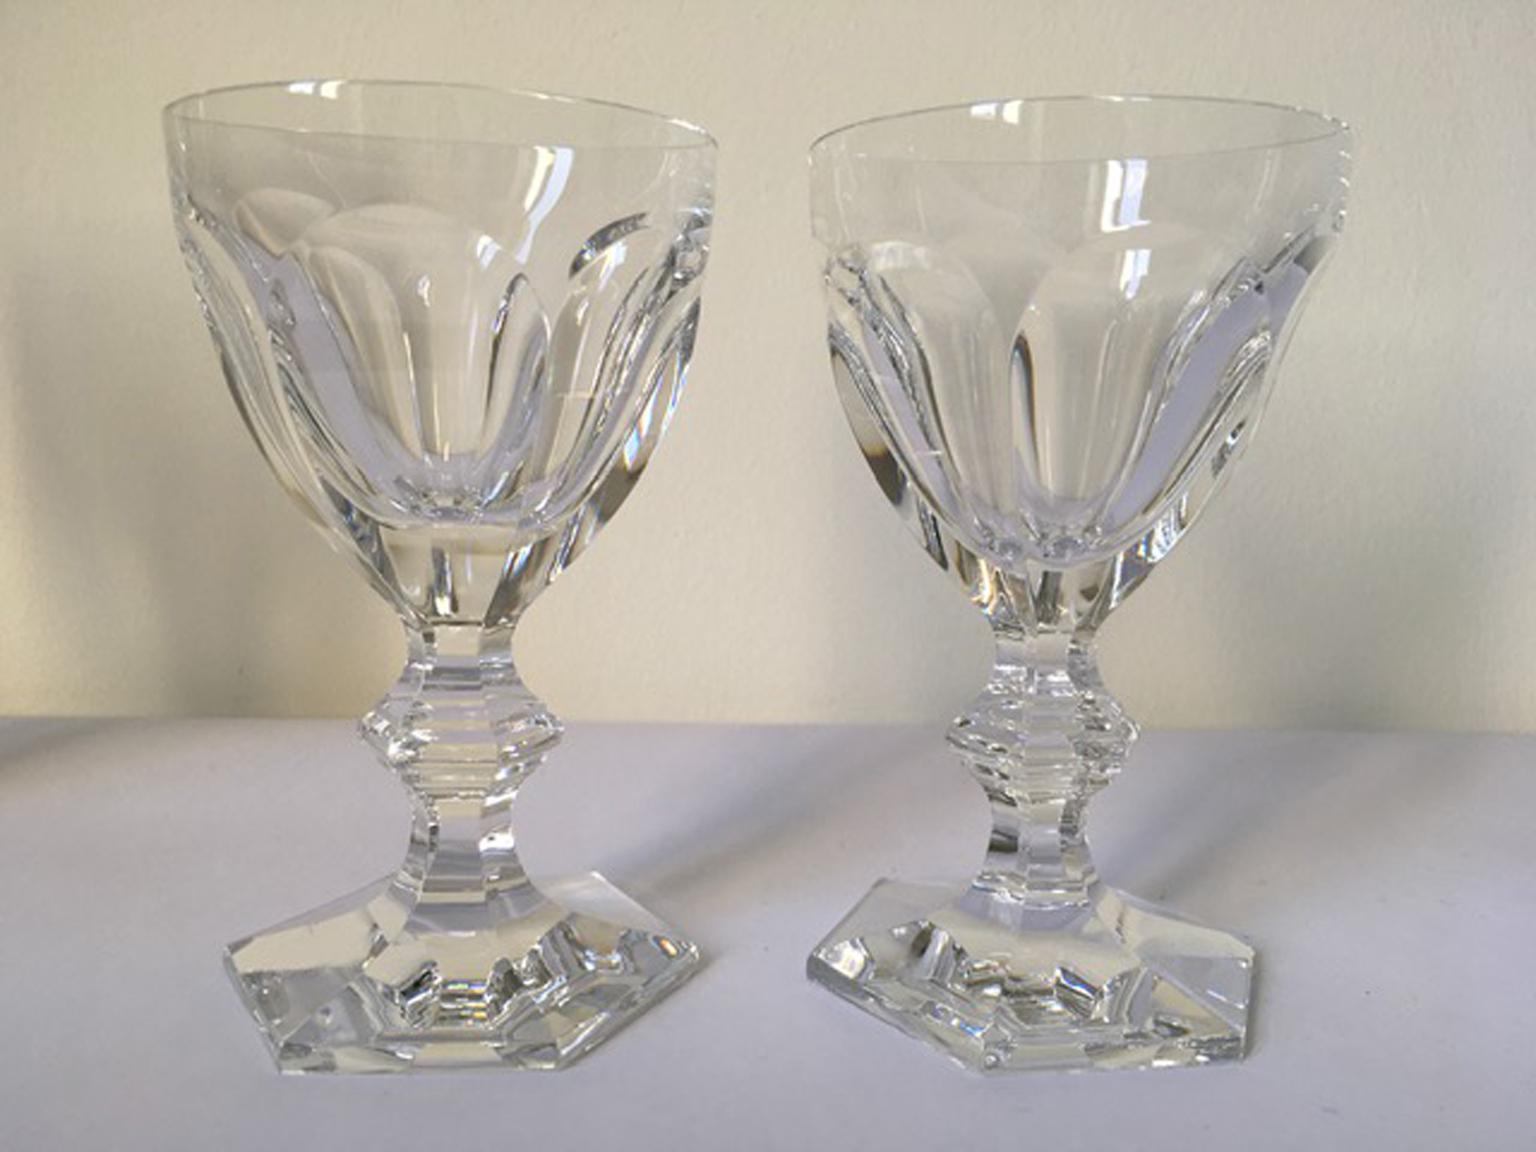 The Harcourt collection, one of the first model produced and presents in Baccarat archive, is reputed for its iconic design. Created in 1841, Harcourt stemware has been chosen and bought from all over the world.
Baccarat crystal is well known for